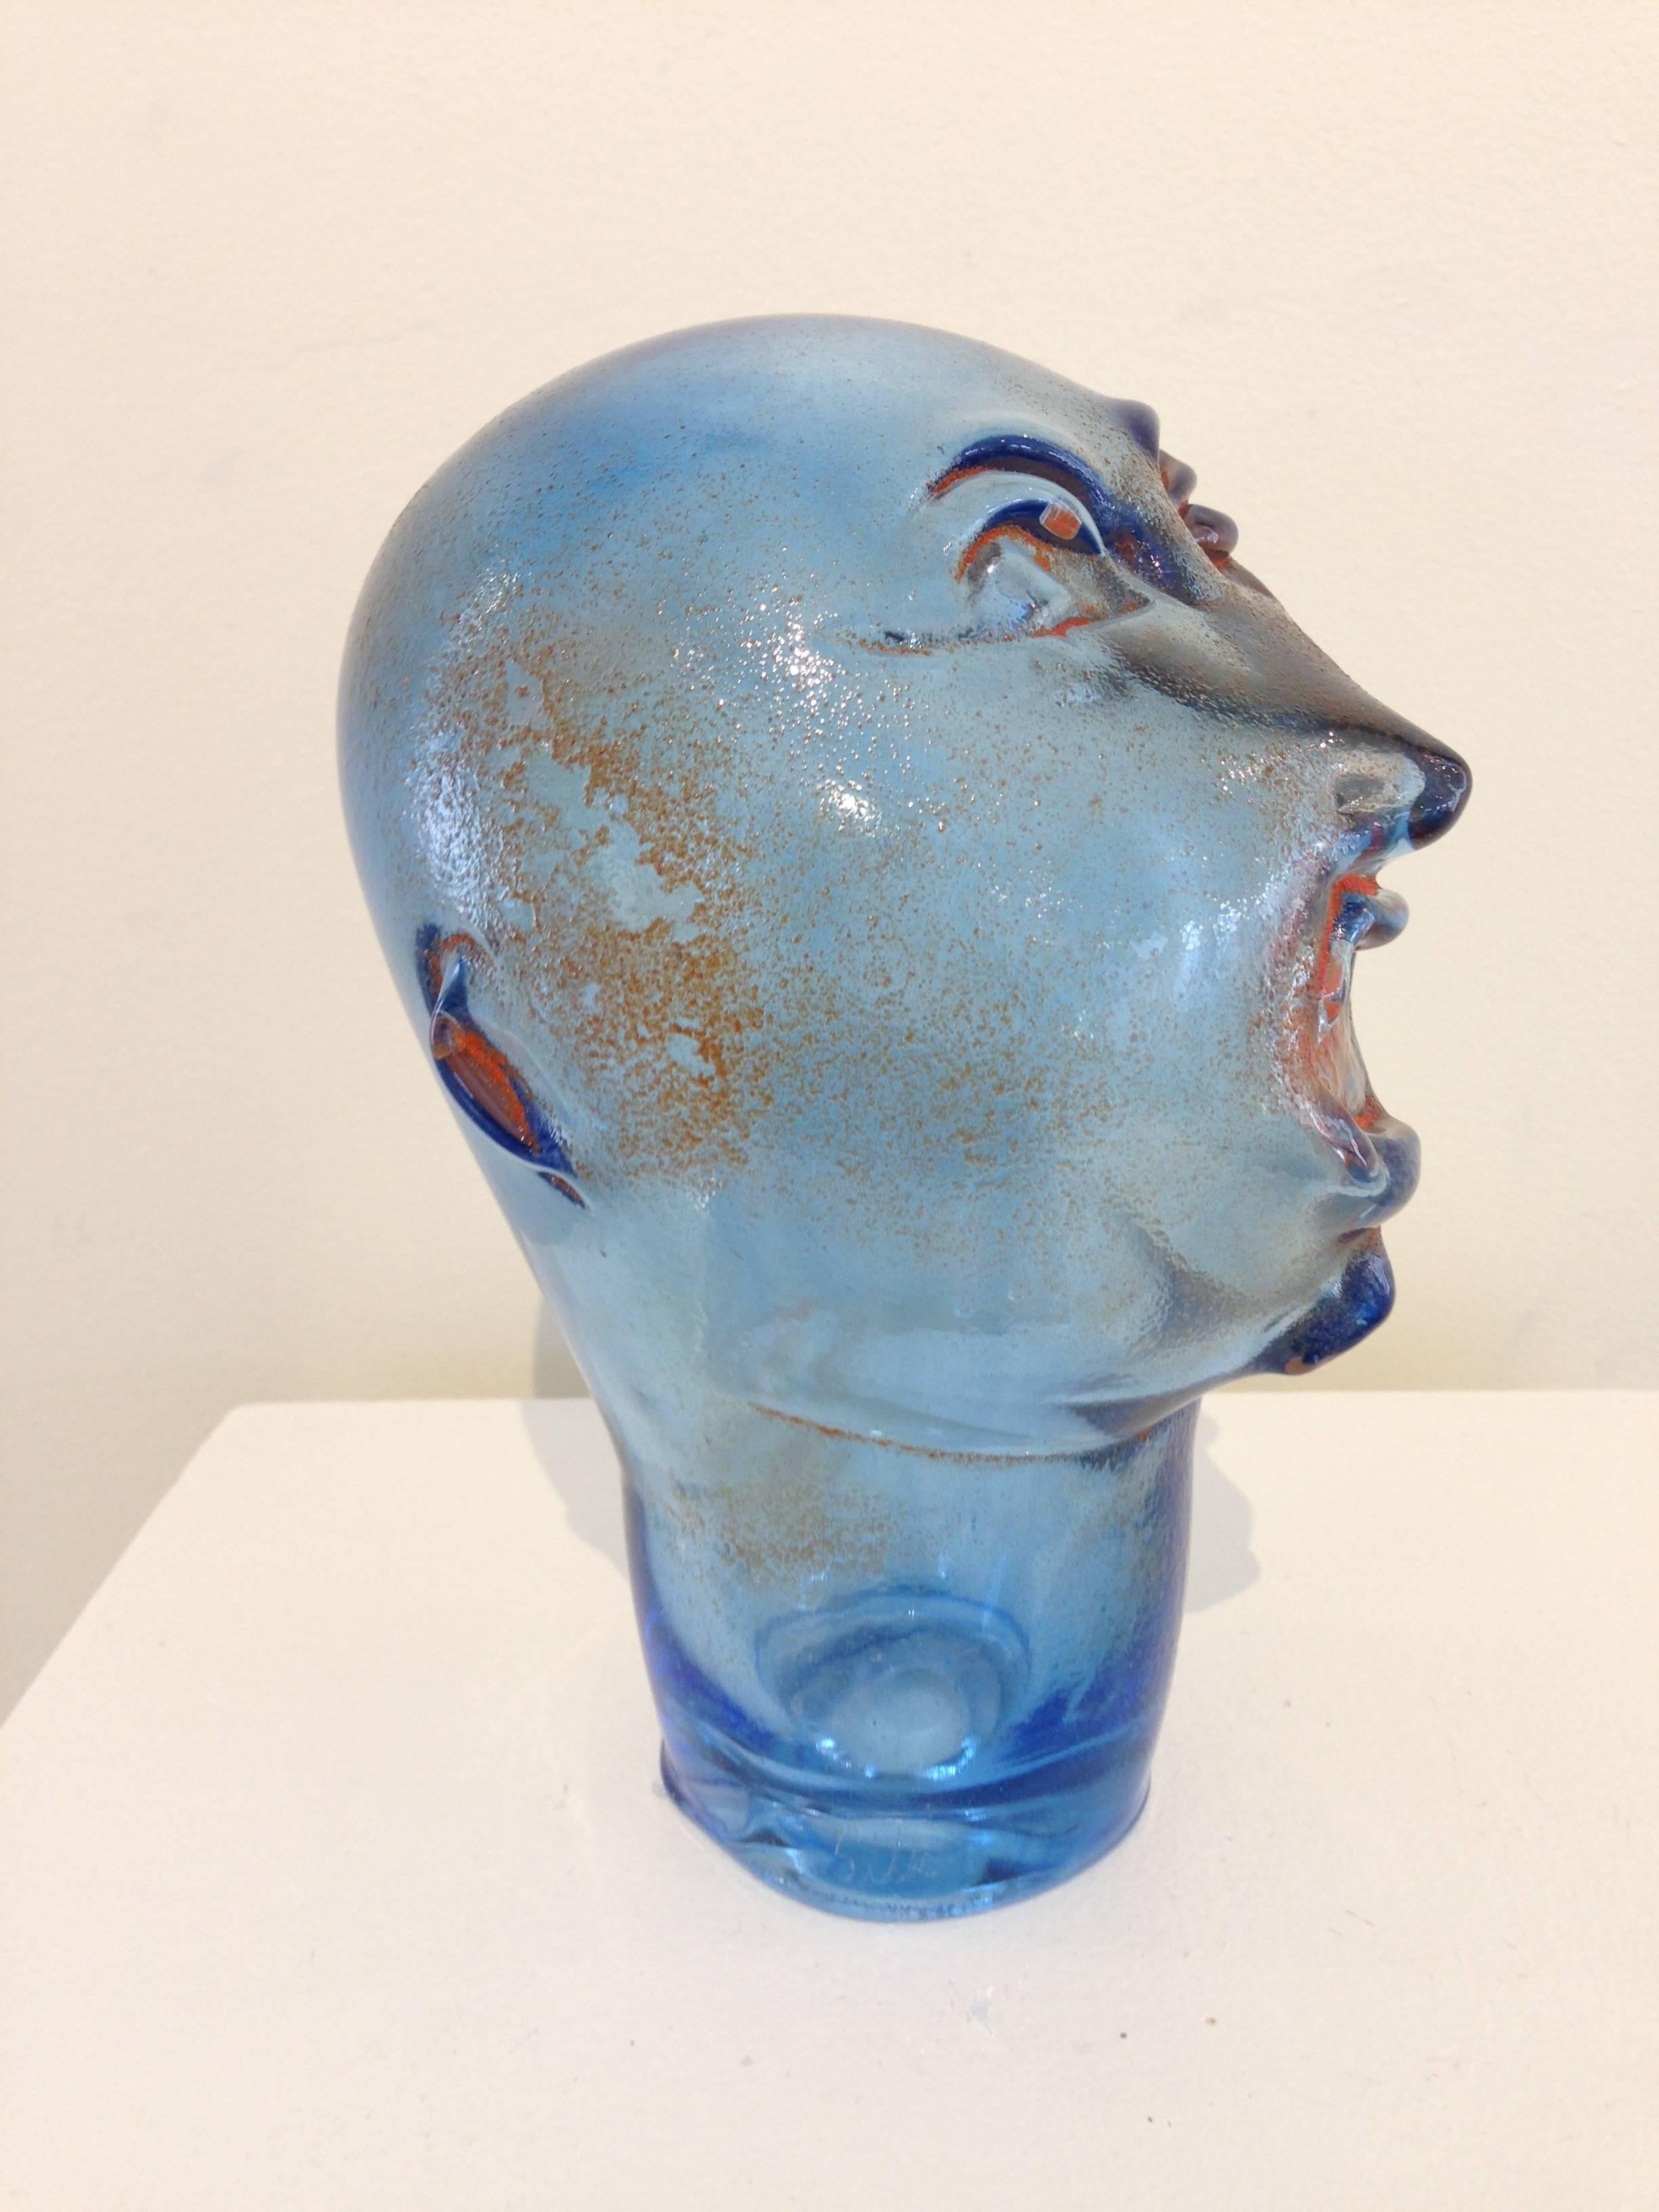 Dream Head #11 - Gray Abstract Sculpture by Alexis Silk